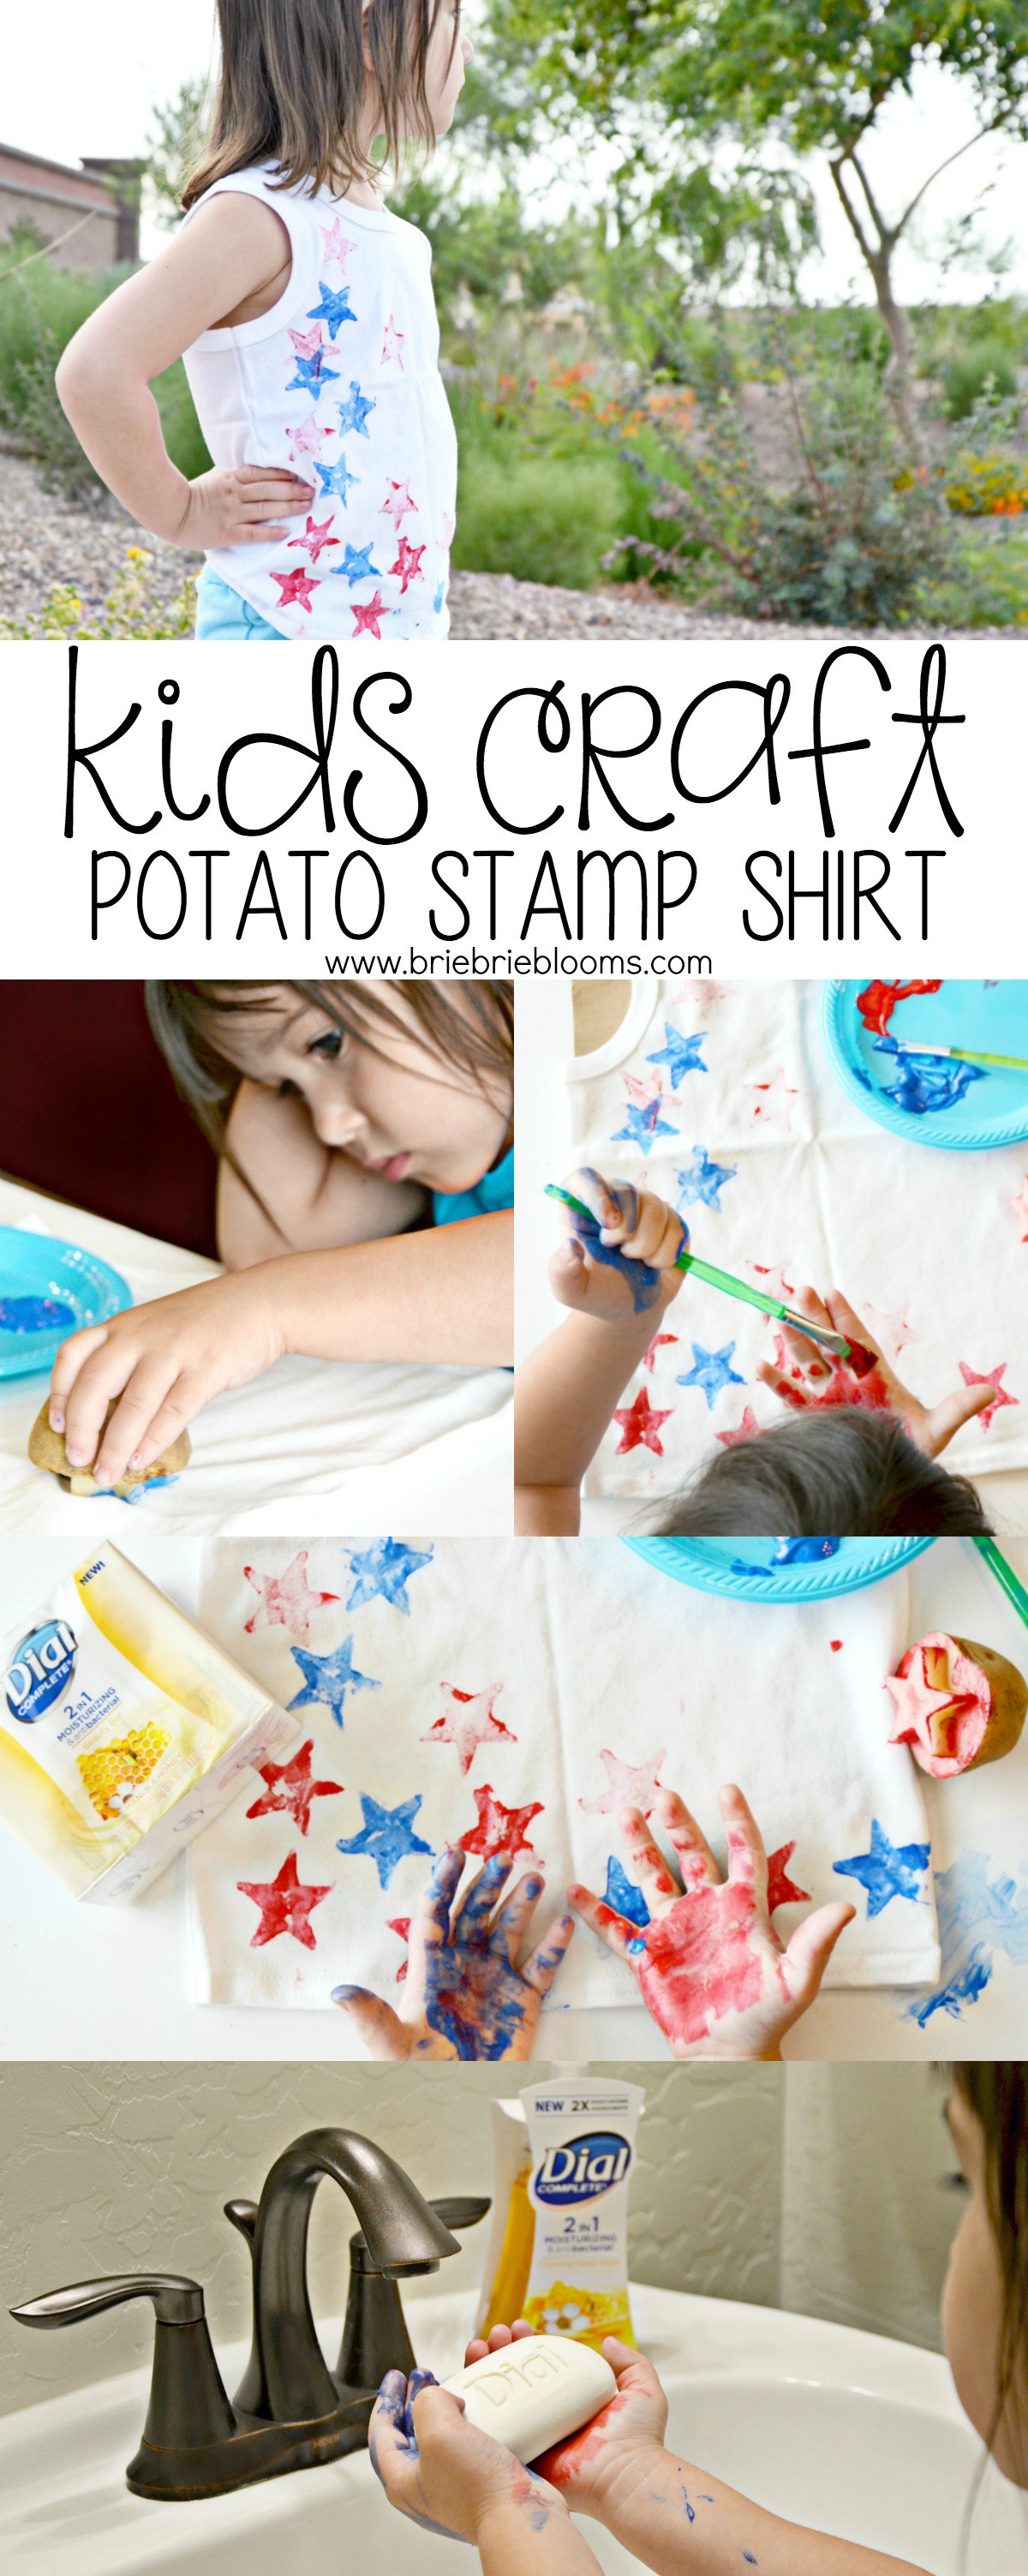 This kids craft potato stamp shirt is so much fun and Dial® makes clean up easy.